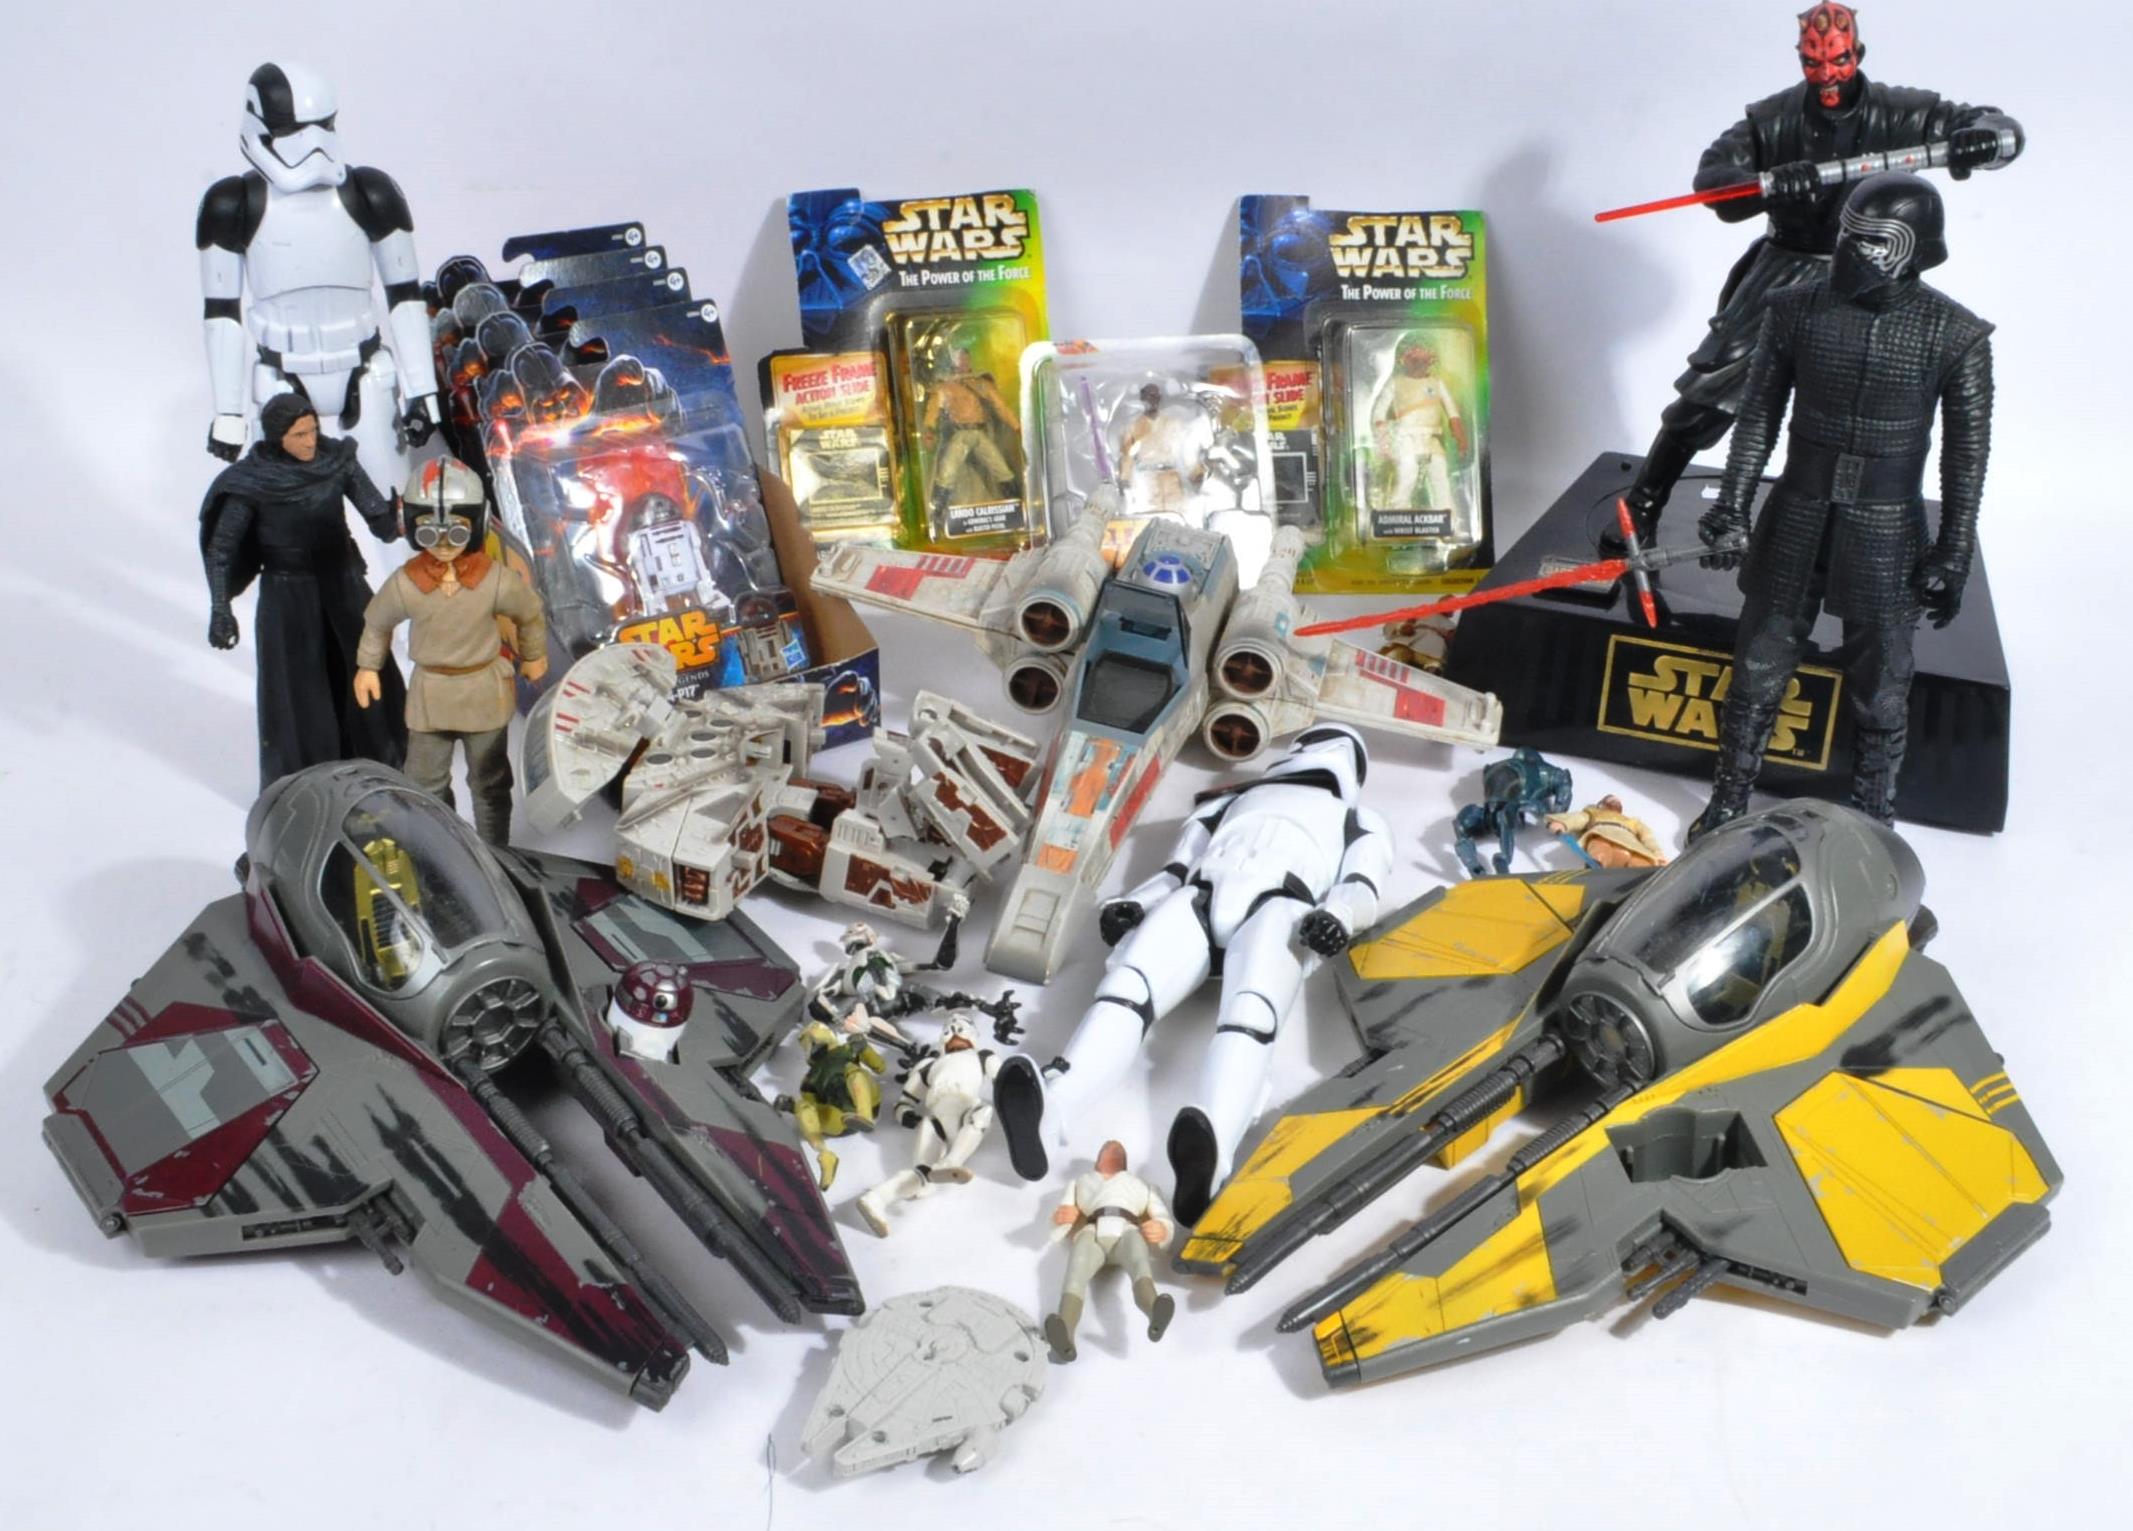 COLLECTION OF ASSORTED STAR WARS ACTION FIGURE PLAY SETS